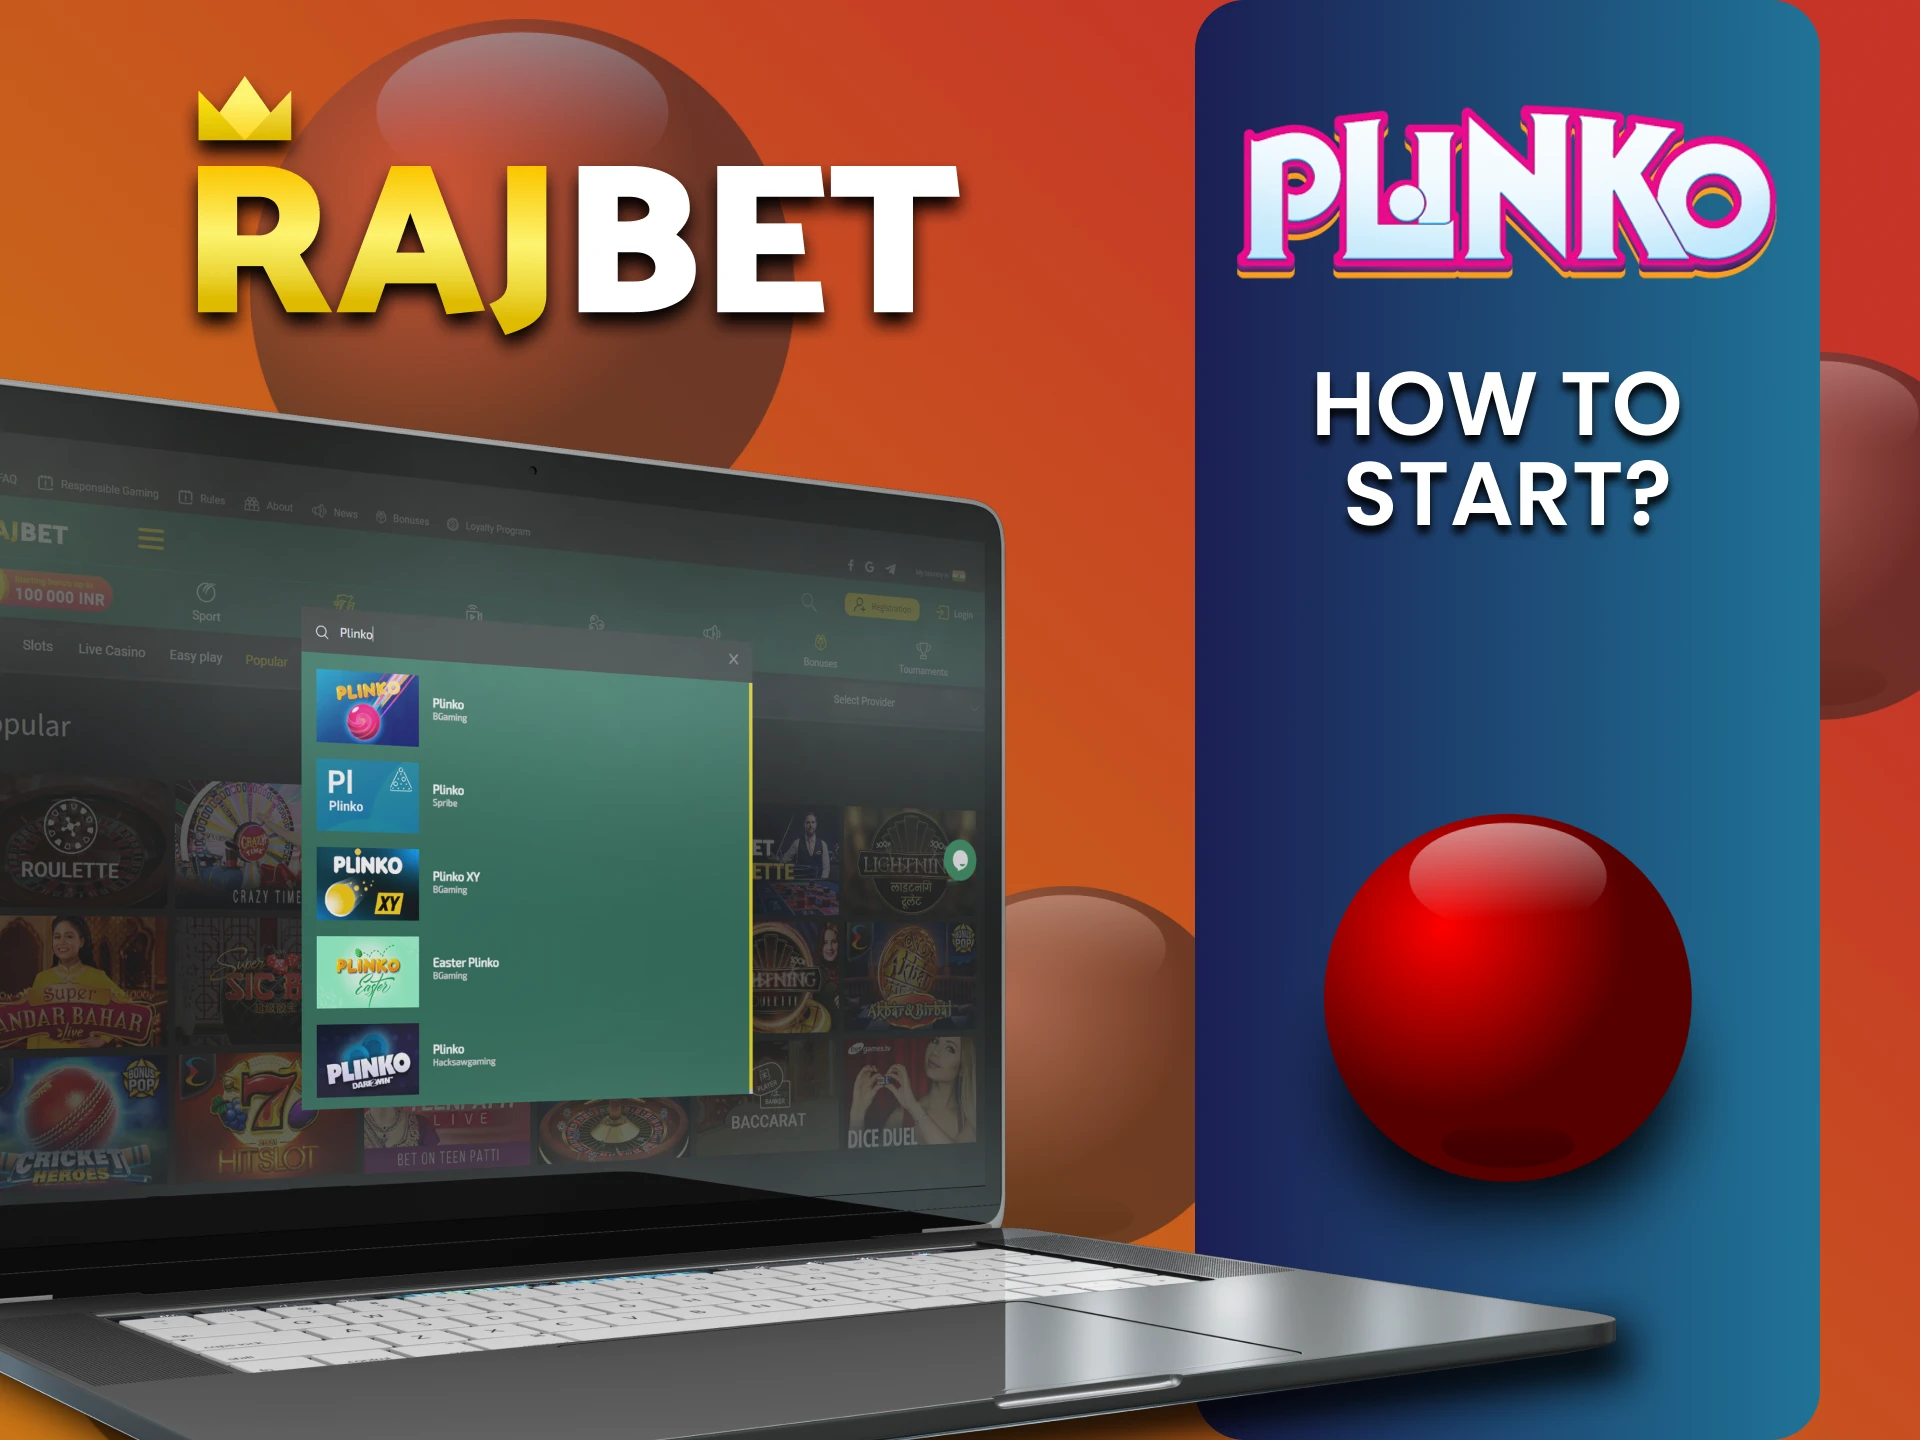 Select the desired section of Rajbet to play Plinko.